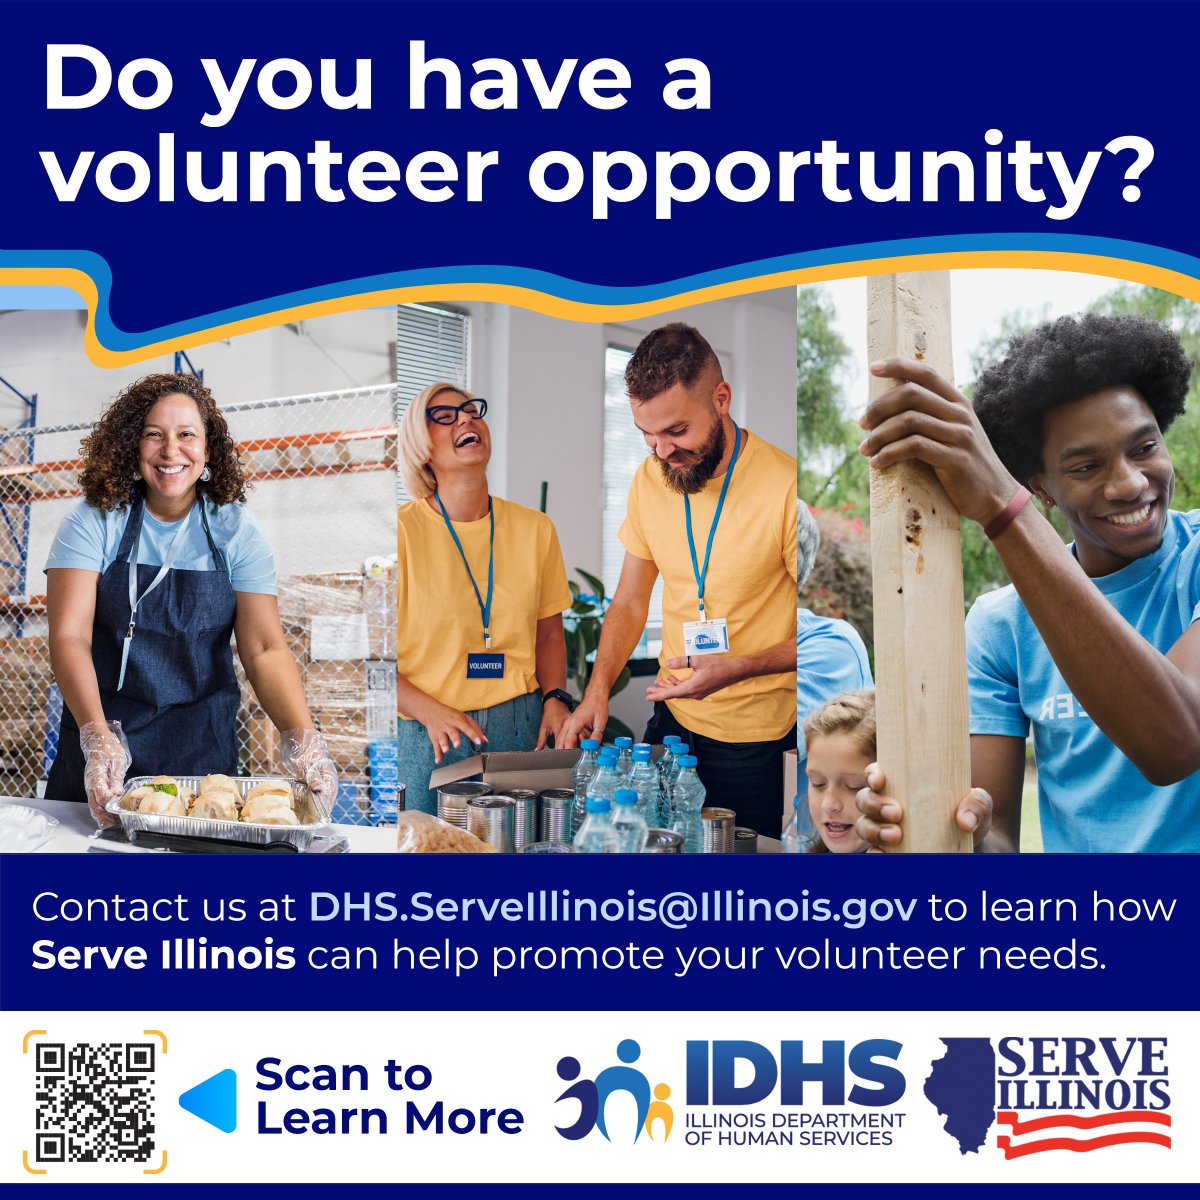 To learn more, scan the QR code below, or visit: serveillinois.galaxydigital.com @ILHumanServices